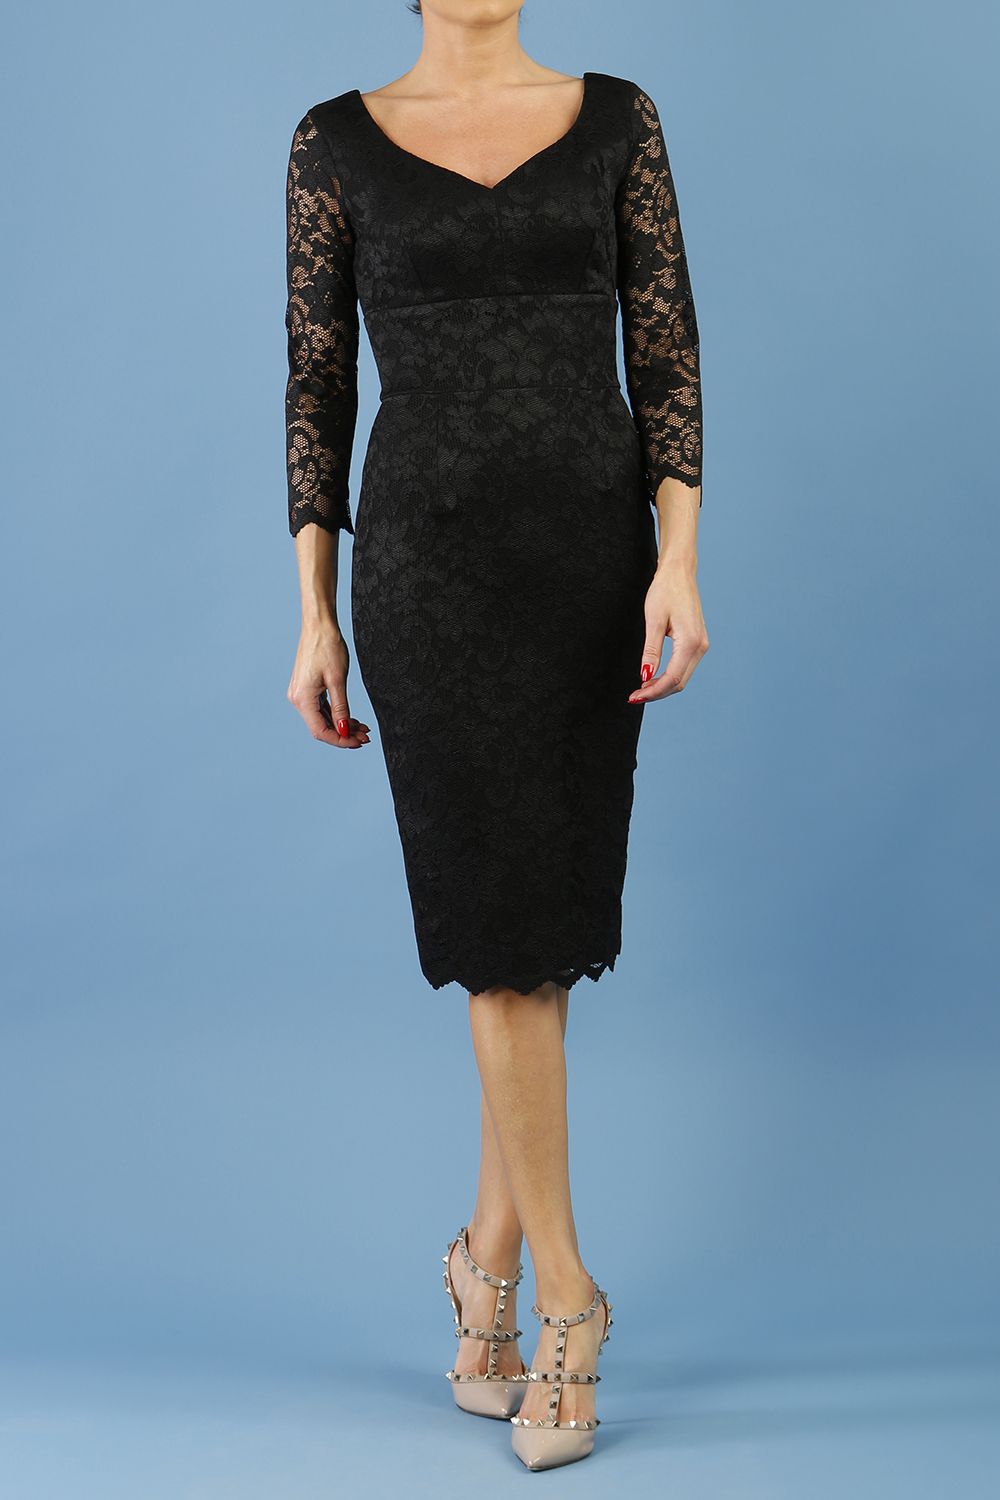 model is wearing diva catwalk bucklebury lace dress with sleeved and low neckline in black front